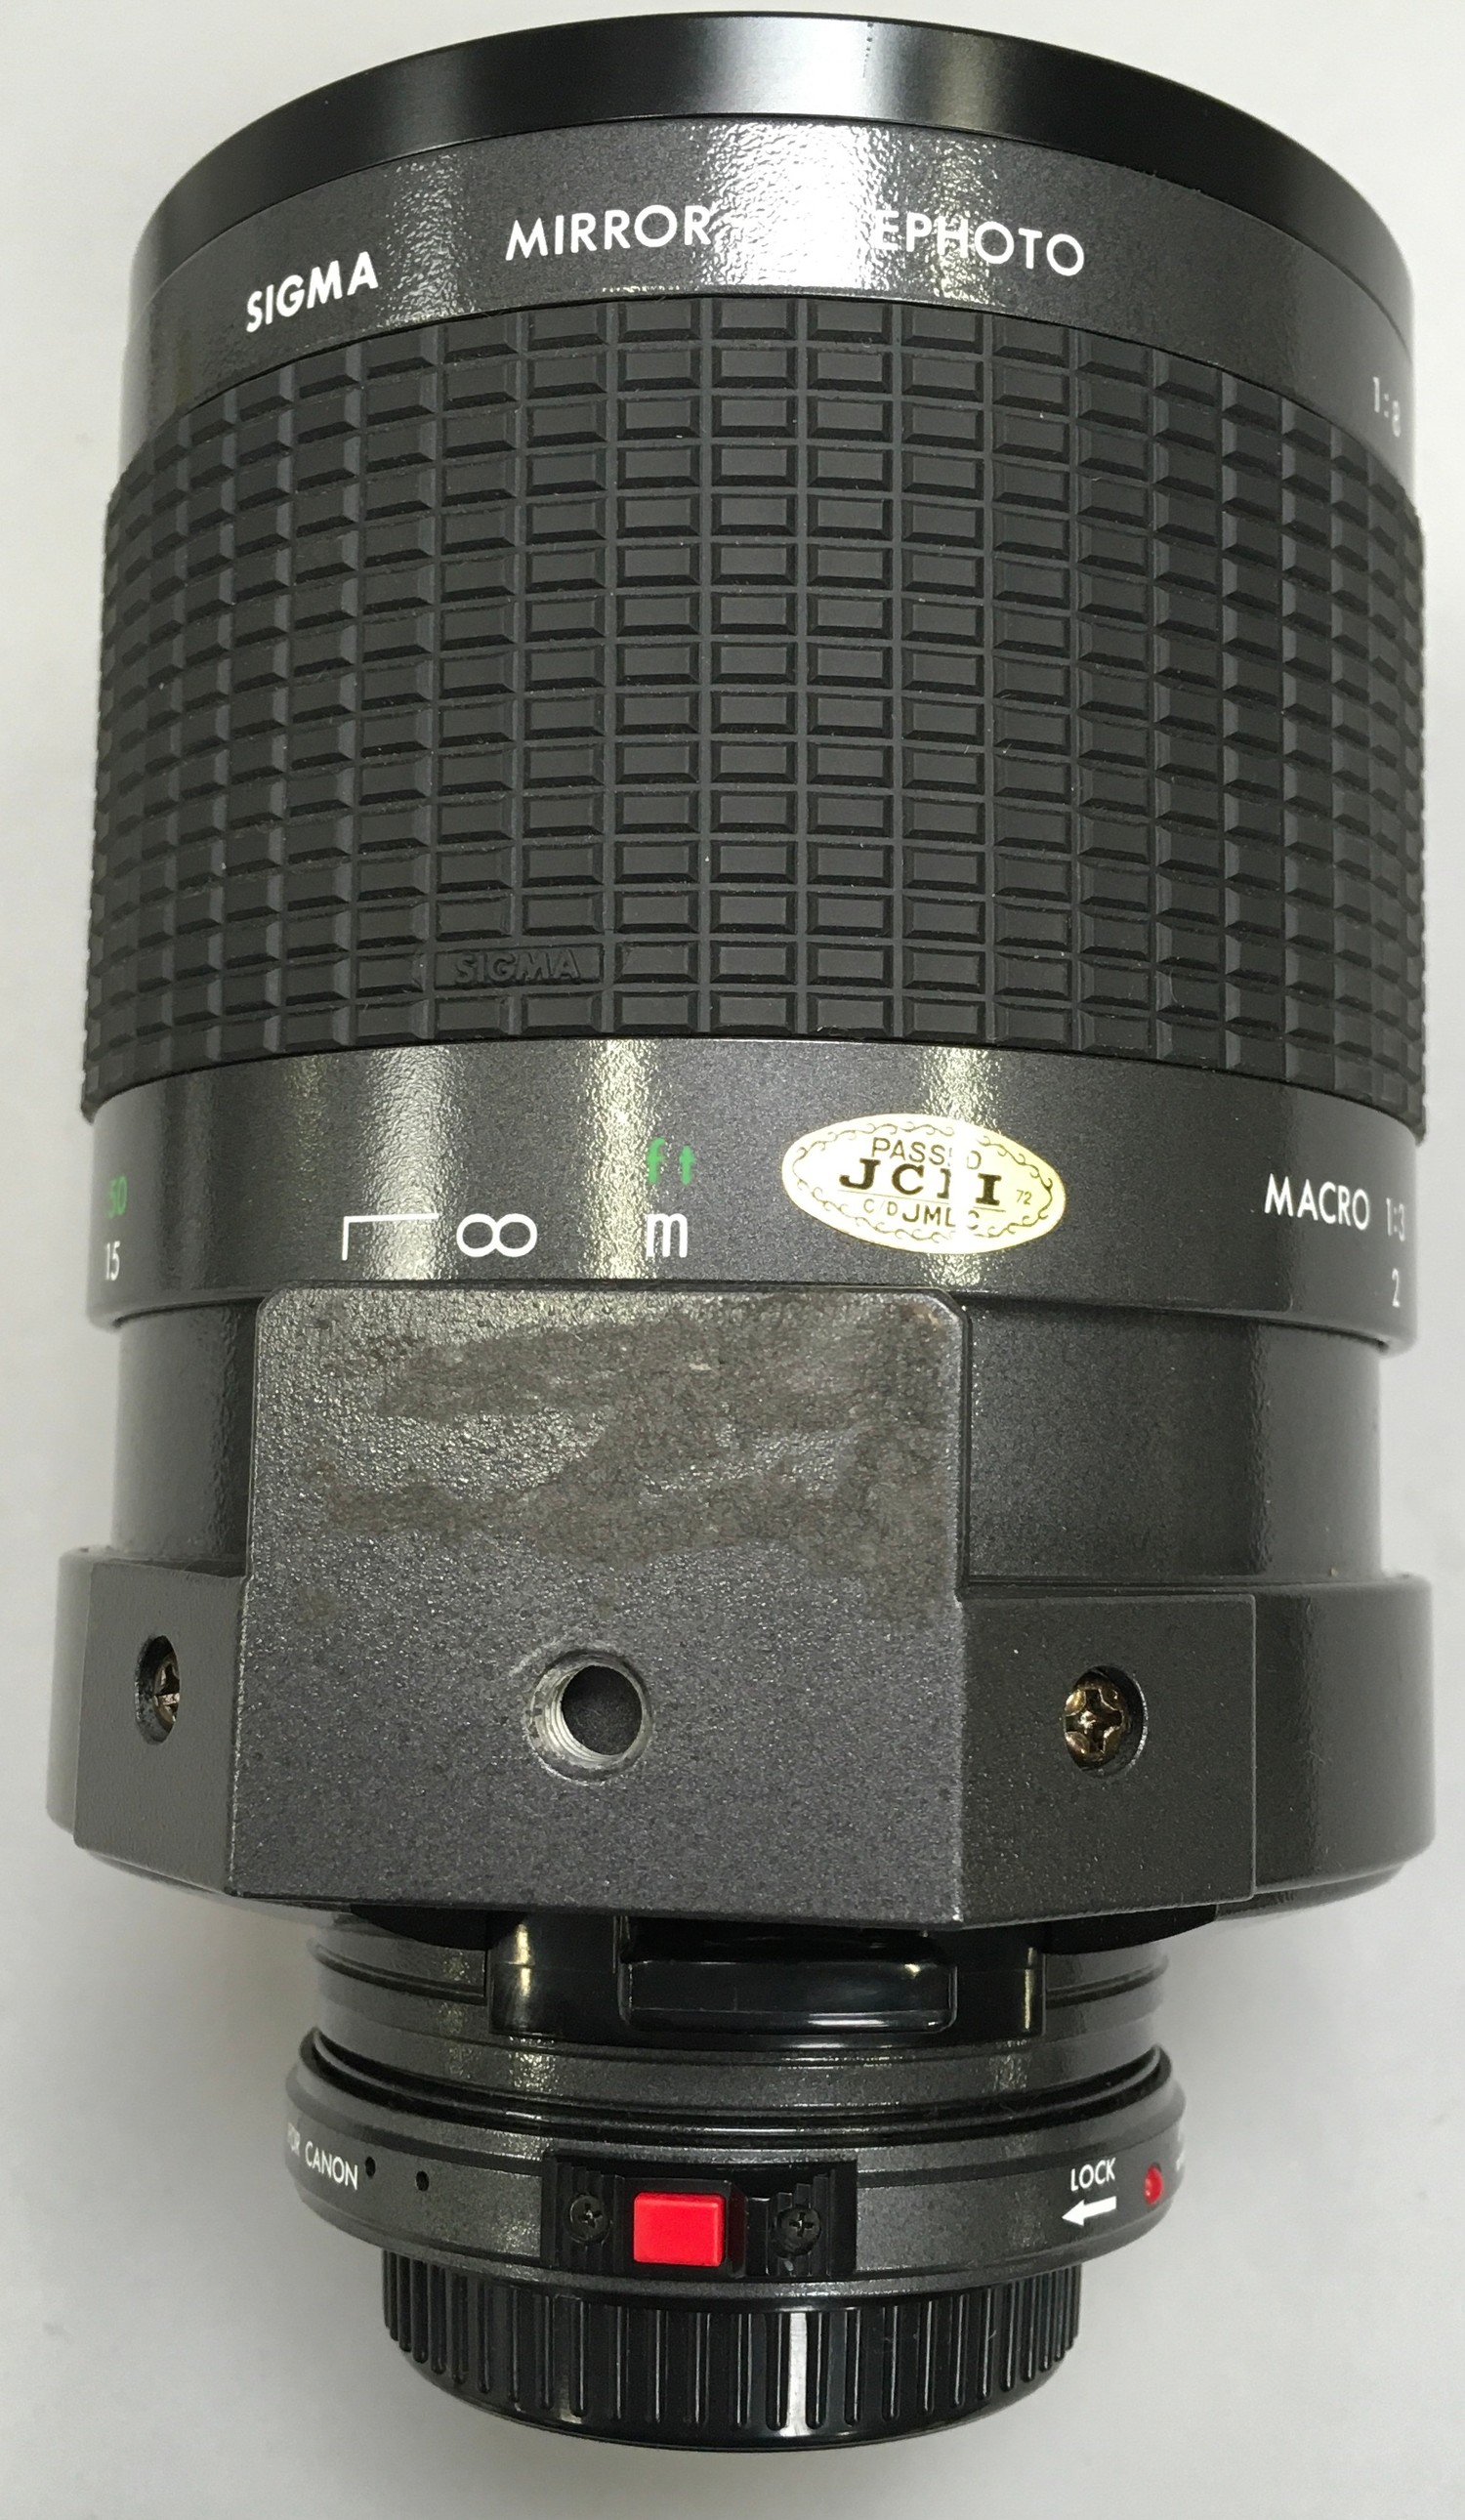 Sigma Macro 1:3 mirror telephoto lens with filters and carry case - Image 3 of 5